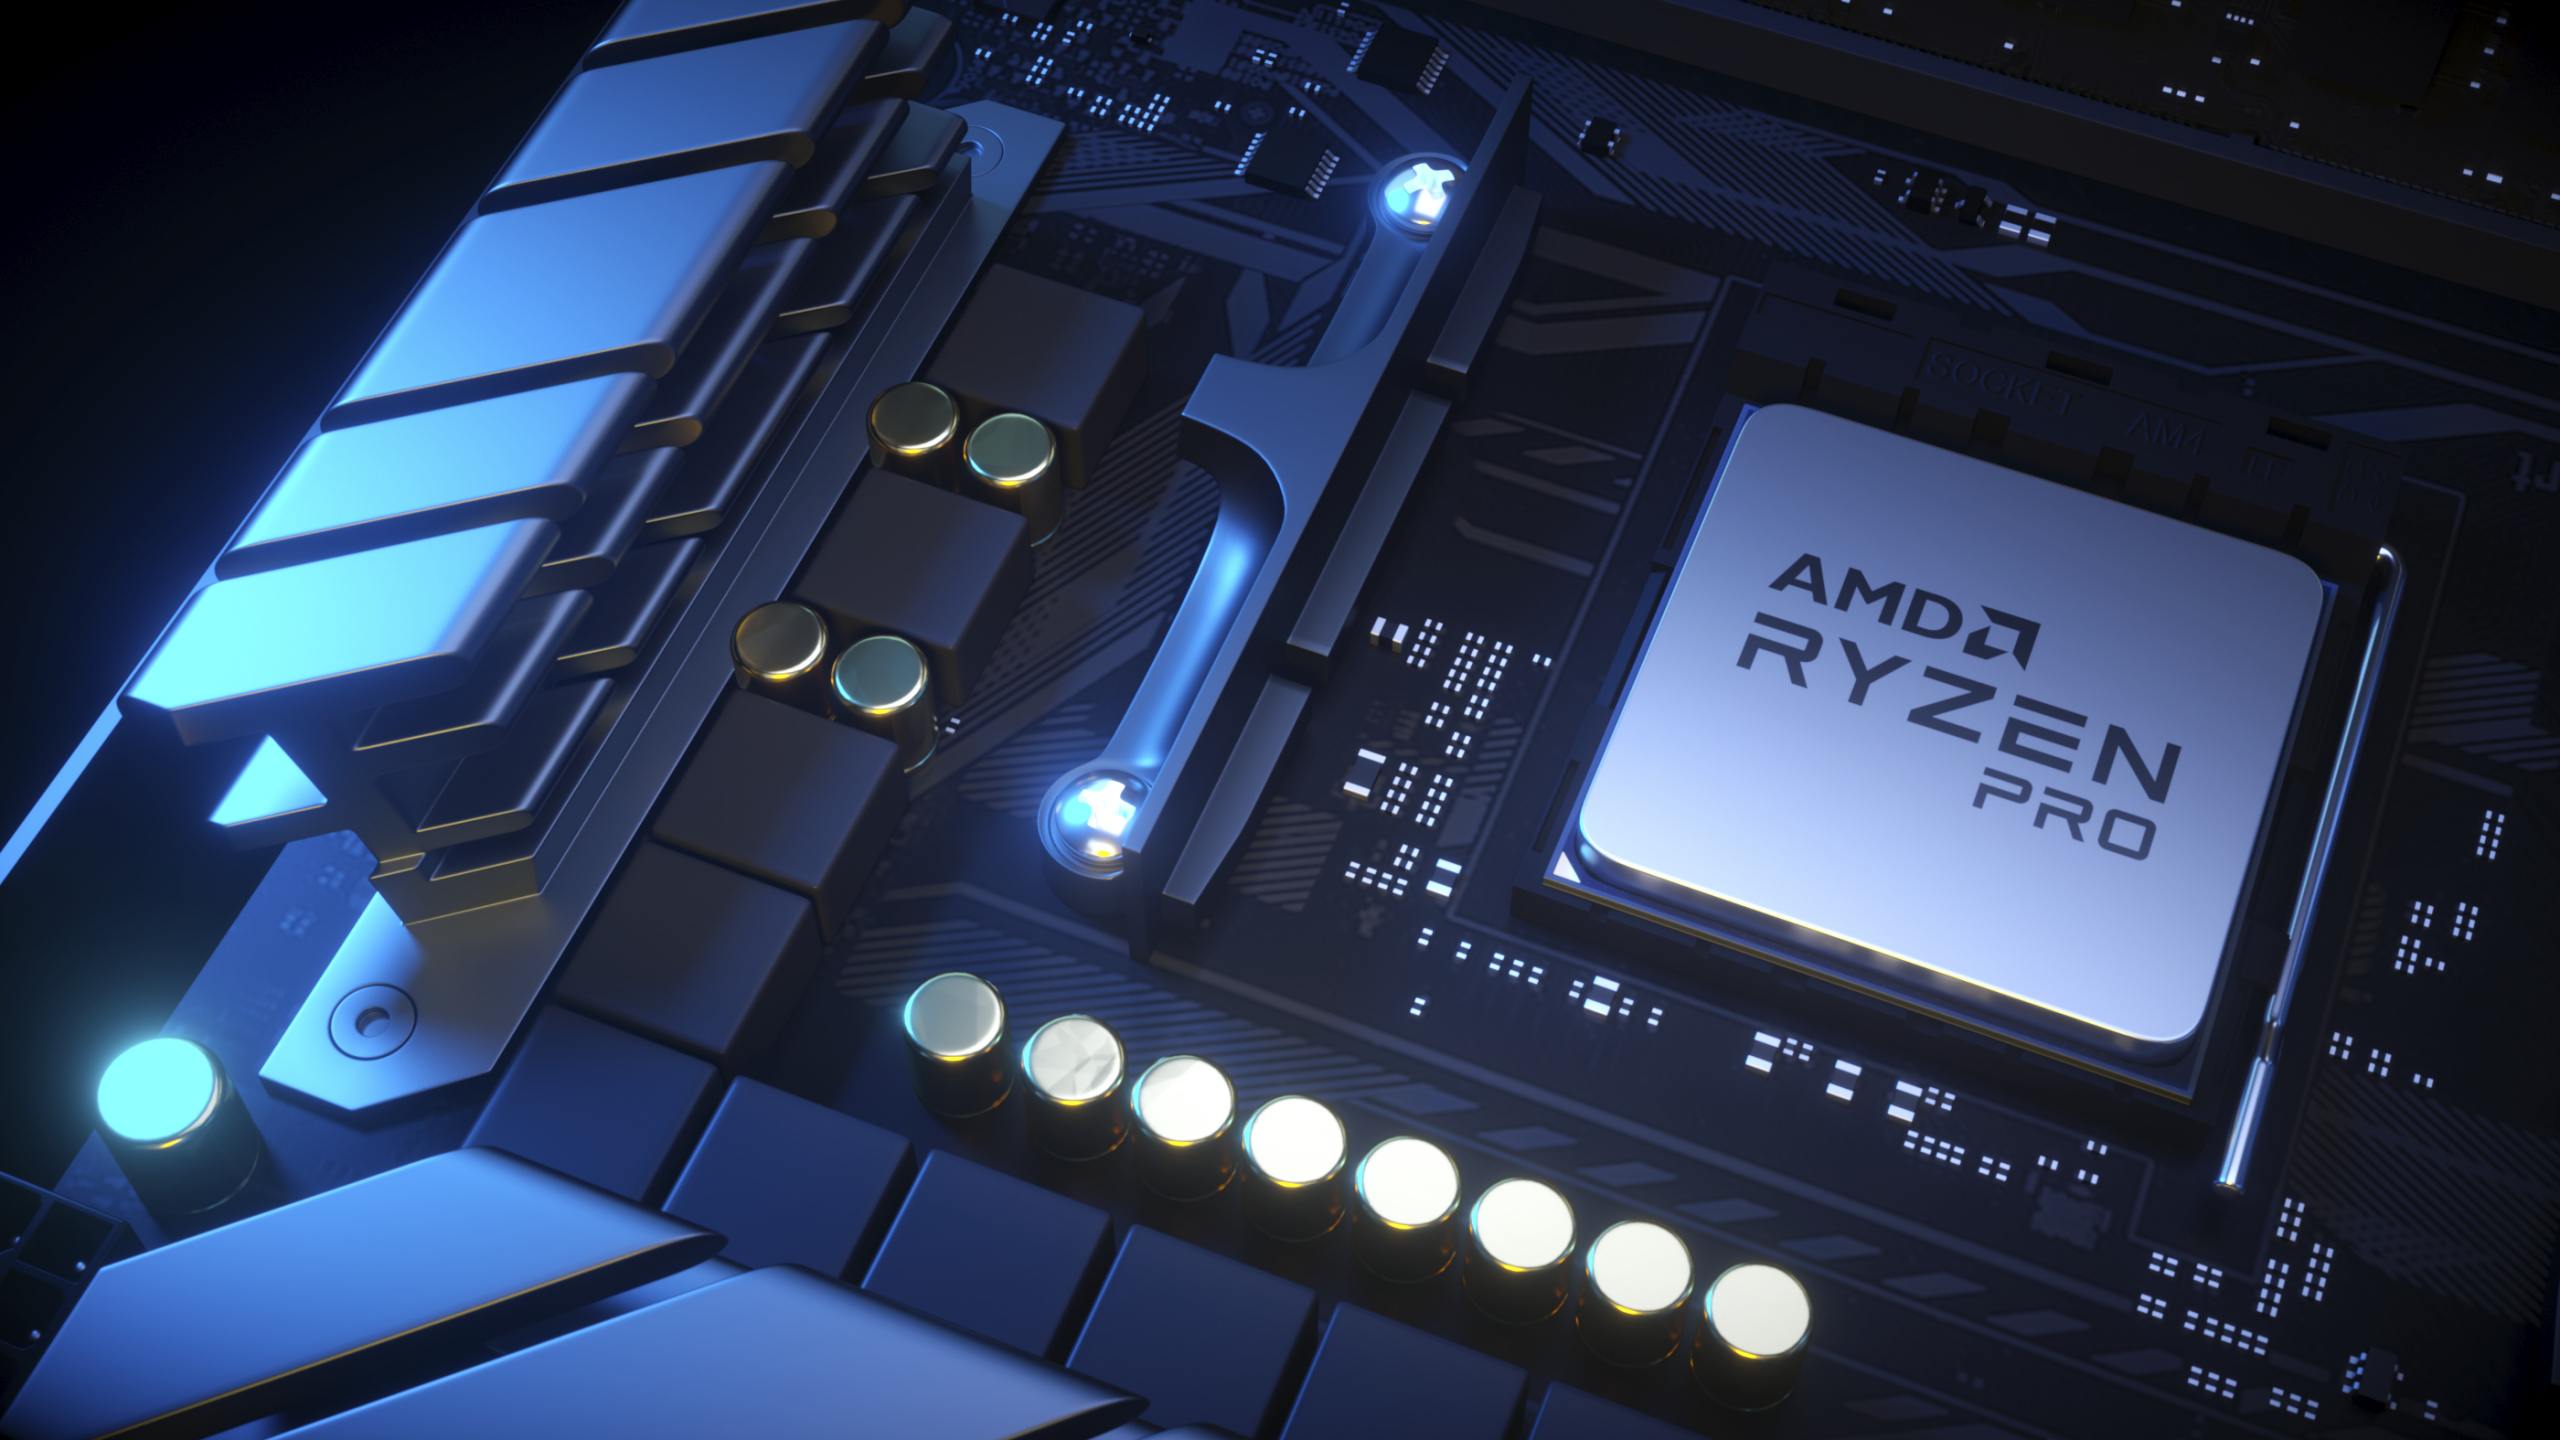 ryzen-5000-pro-zen-3-apus-can-be-a-game-changer-for-businesses